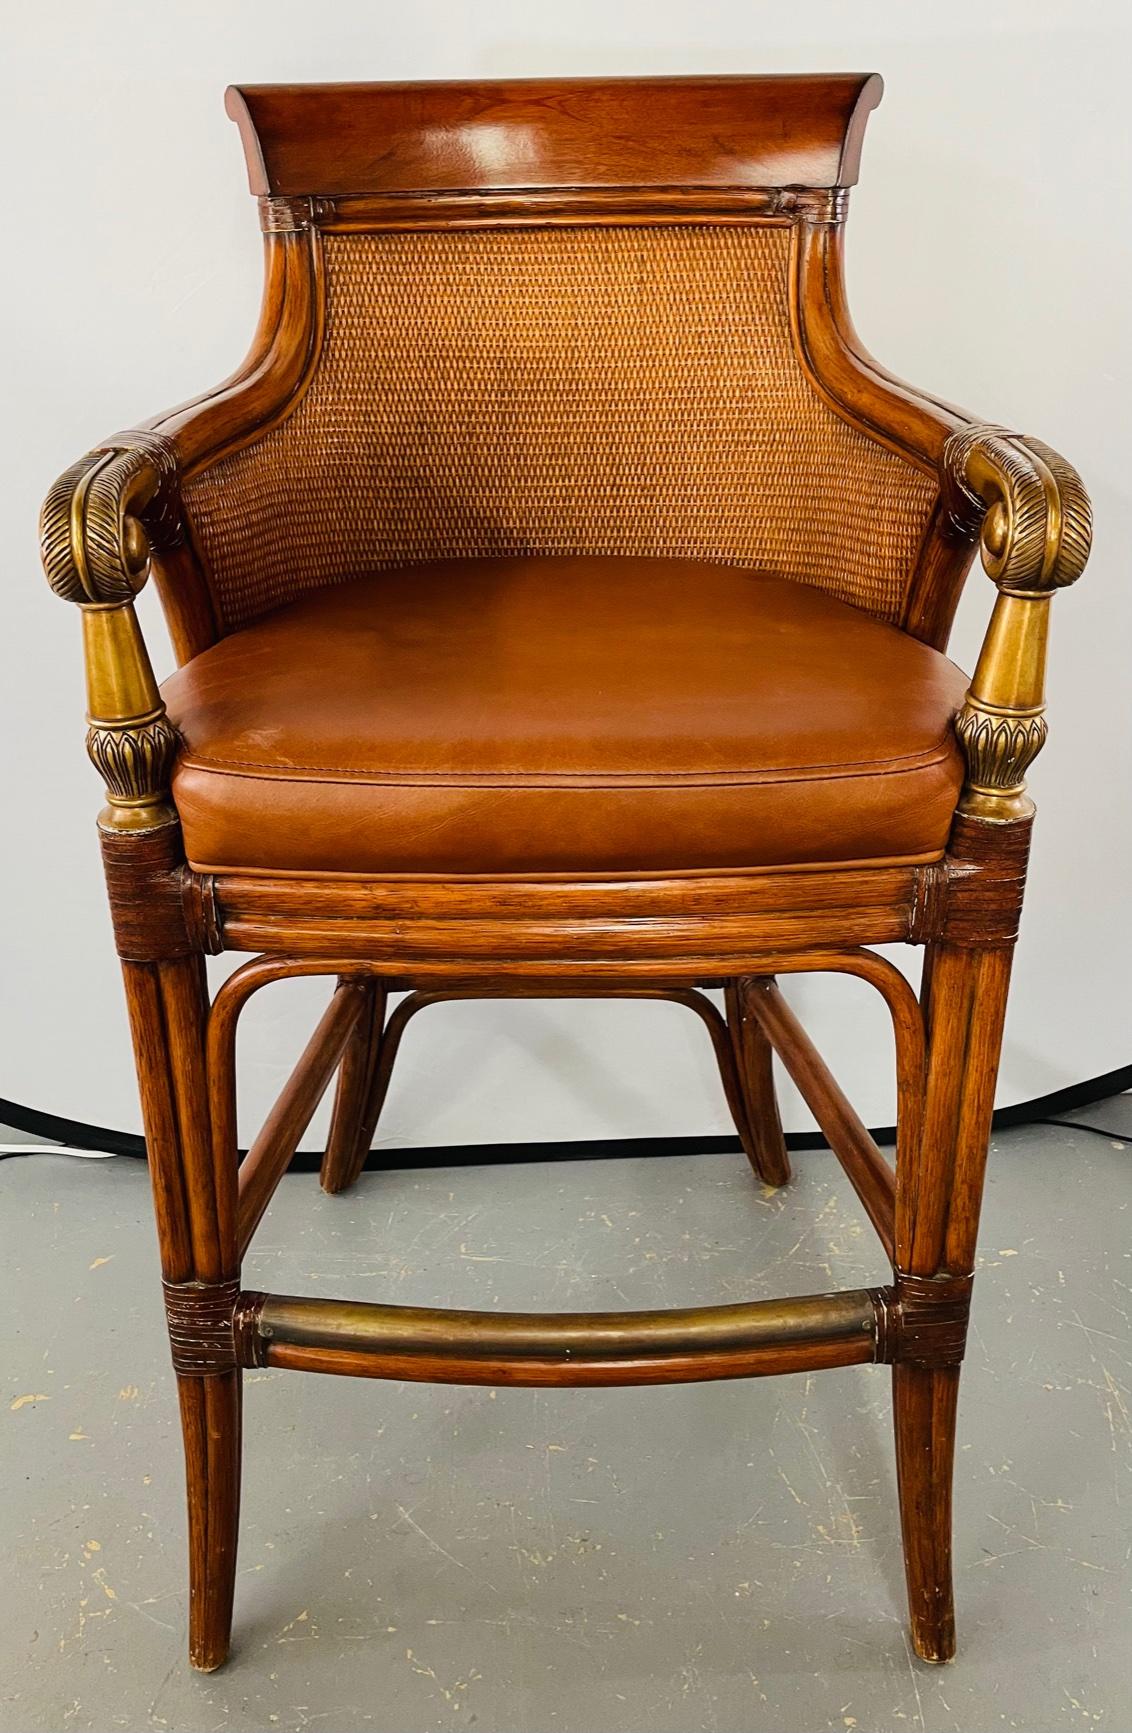 An elegant pair of Ethan Allen townhouse faux bamboo rattan bar stools featuring genuine leather seats and Fine wood carving details with cast metal in brass finish arms ending in scroll design. The stools are sturdy and their timeless style would